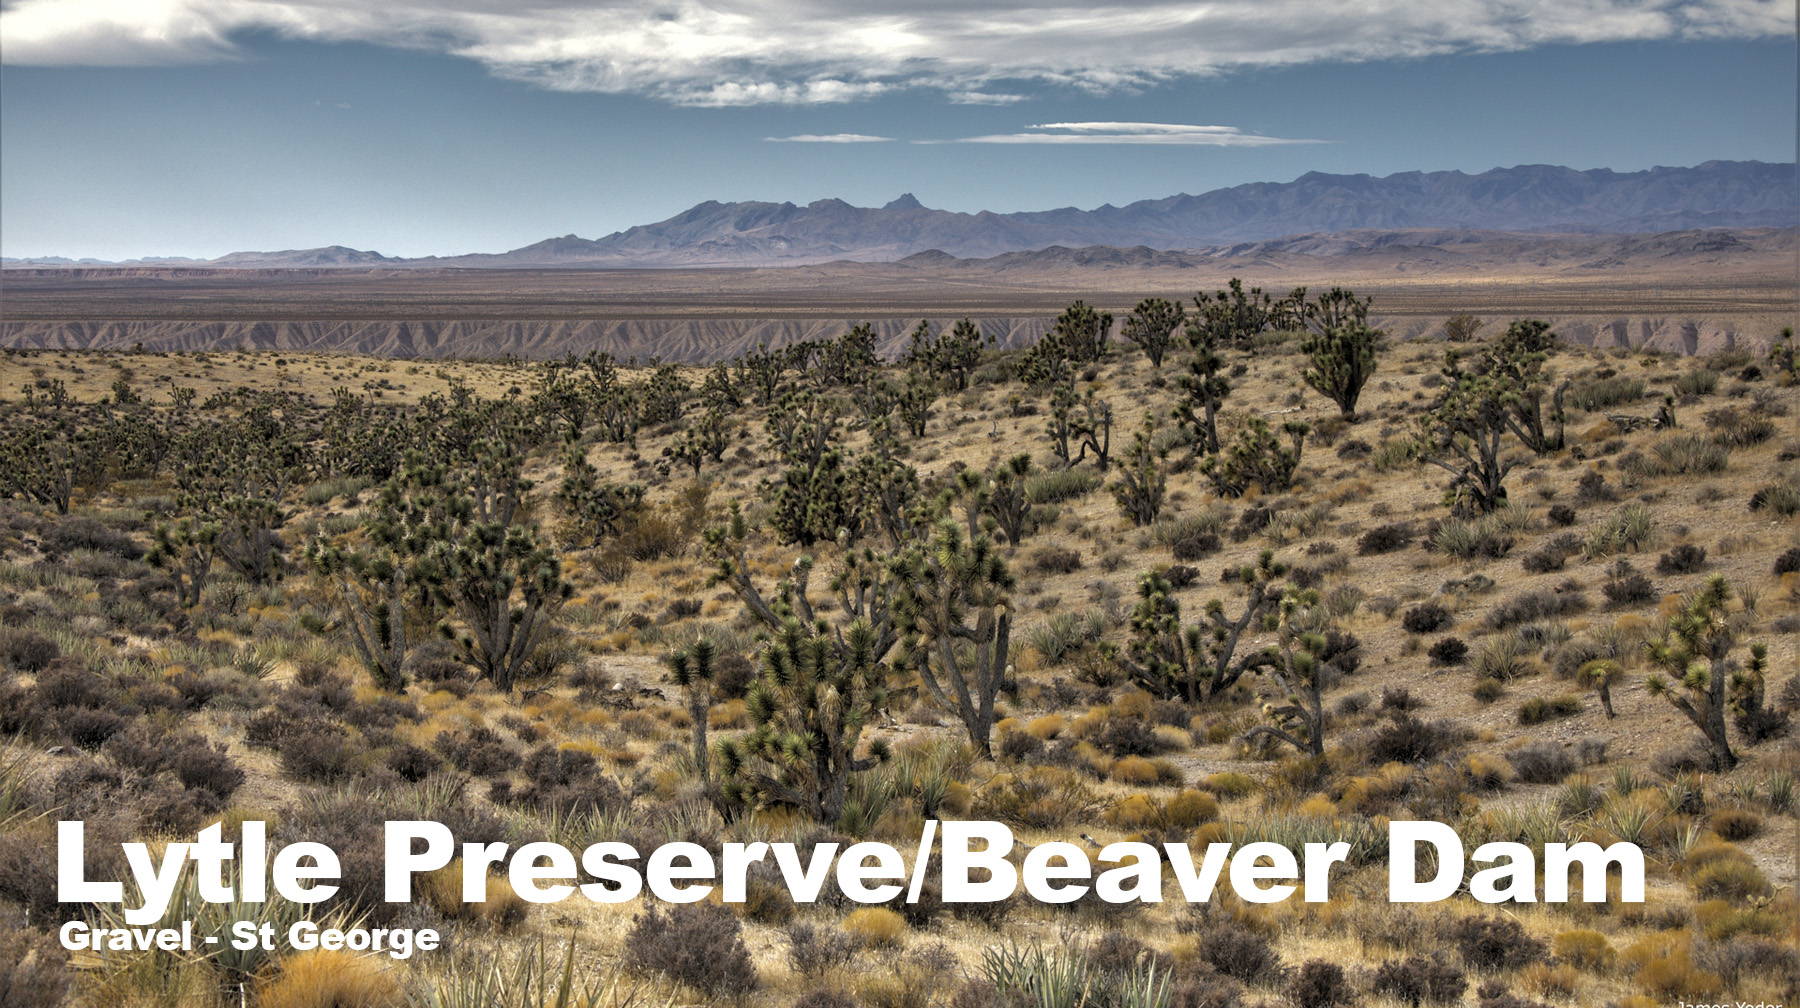 Lytle Preserve and Beaver Dam Wash